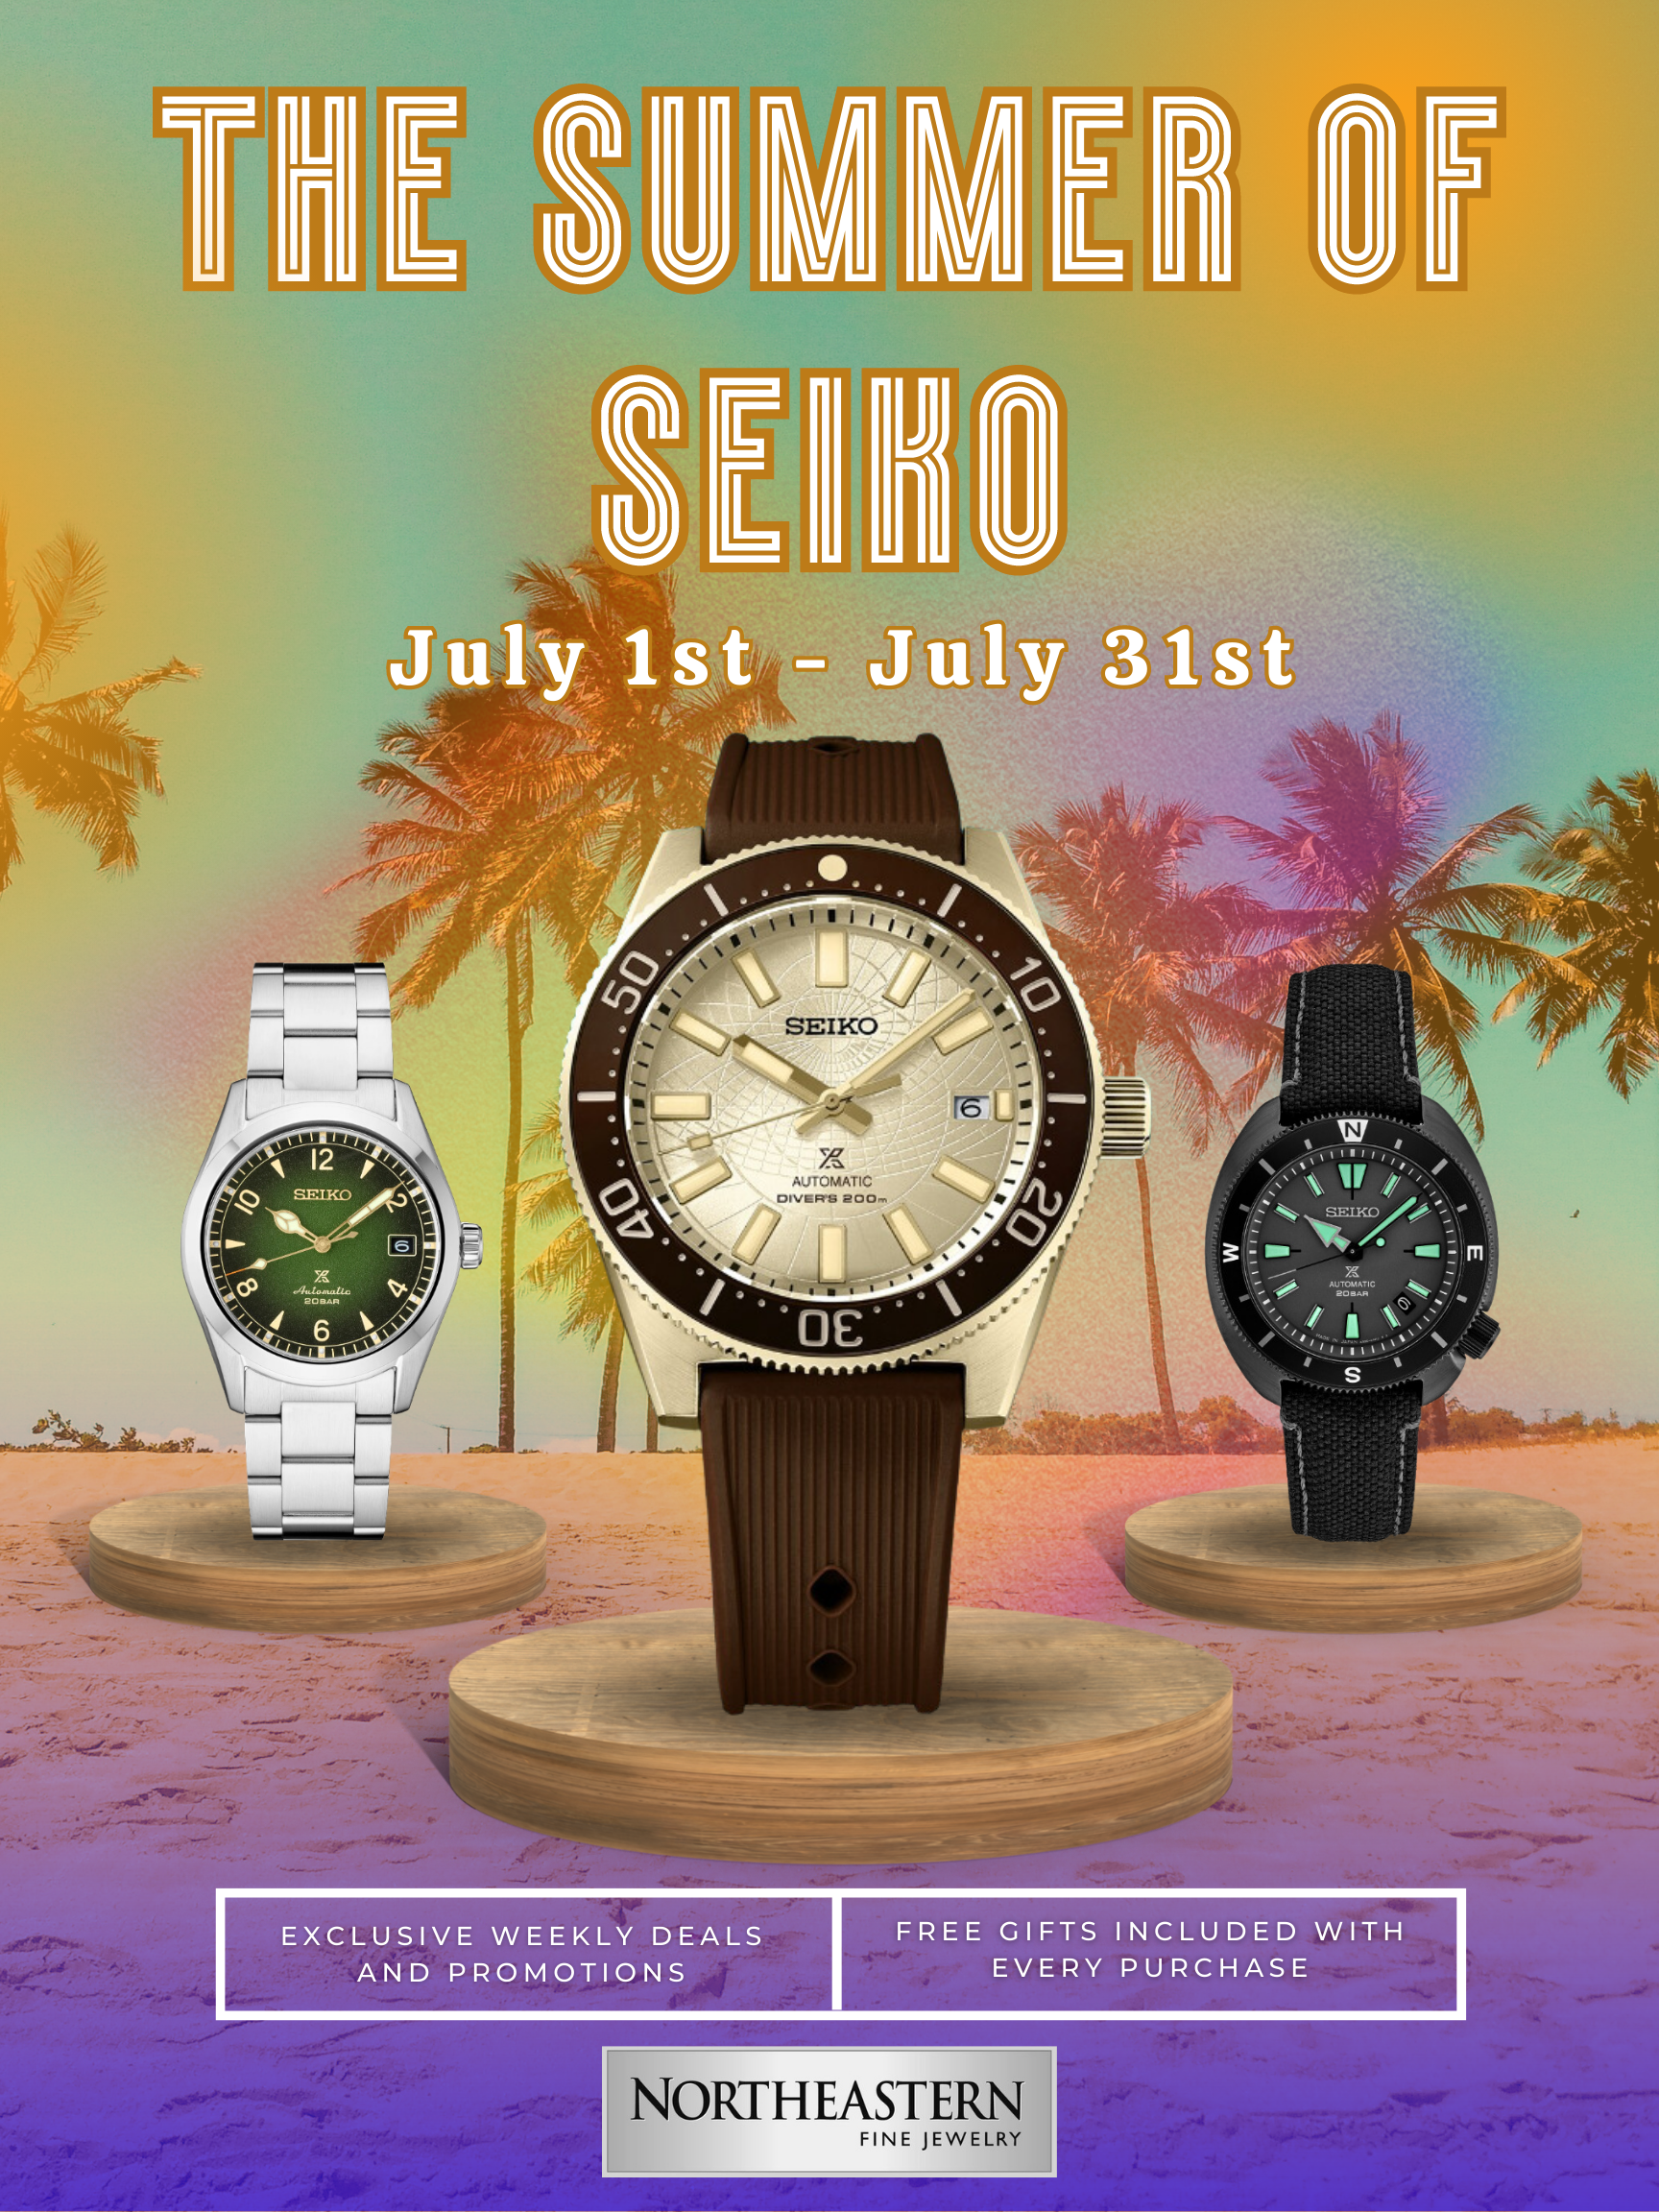 Summer of Seiko from July 1st - July 31st at Northeastern Fine Jewelry